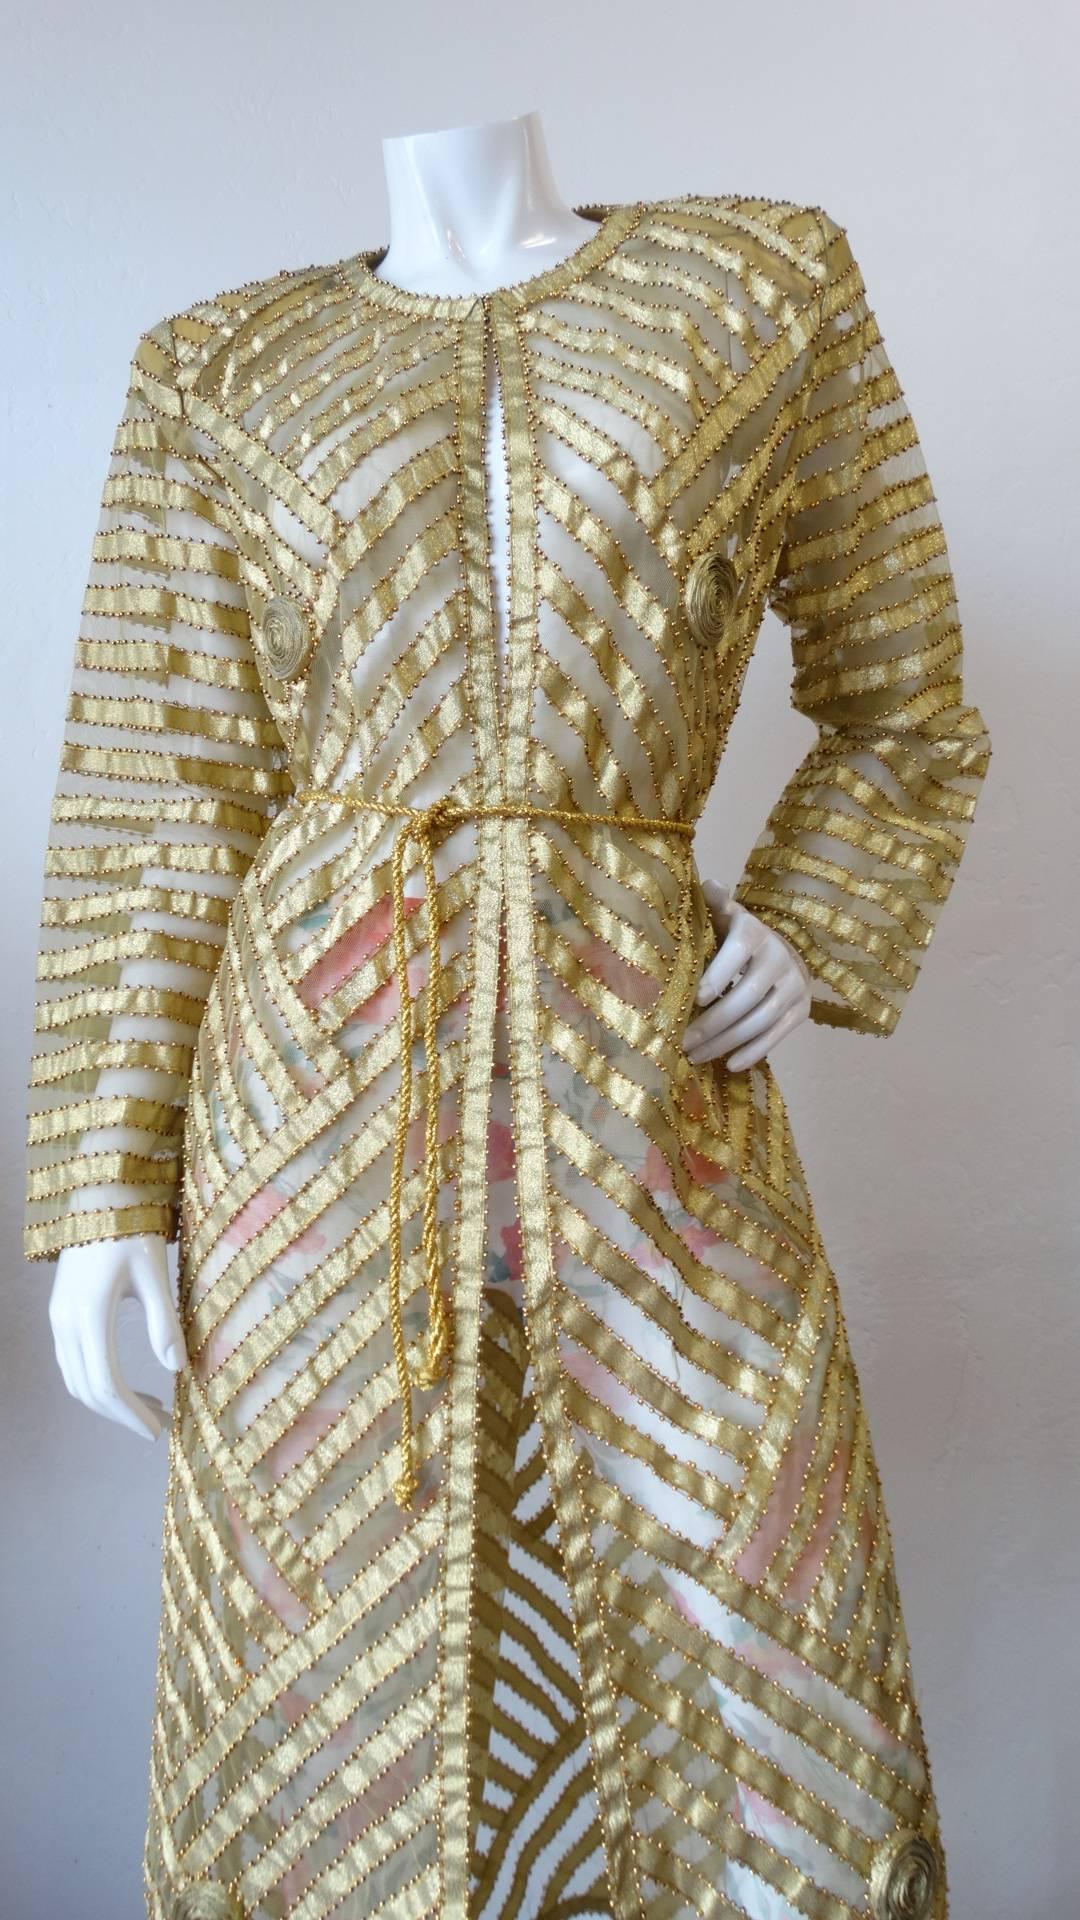 Amazing 1980s beaded gold dress from Tan-Chho! Sheer rayon fabric contrasted with gold lame chevron striping all over! Gold beading along each of the stripes. Cinches in at the waist perfectly with matching gold cord. Rolled, gold fabric flower